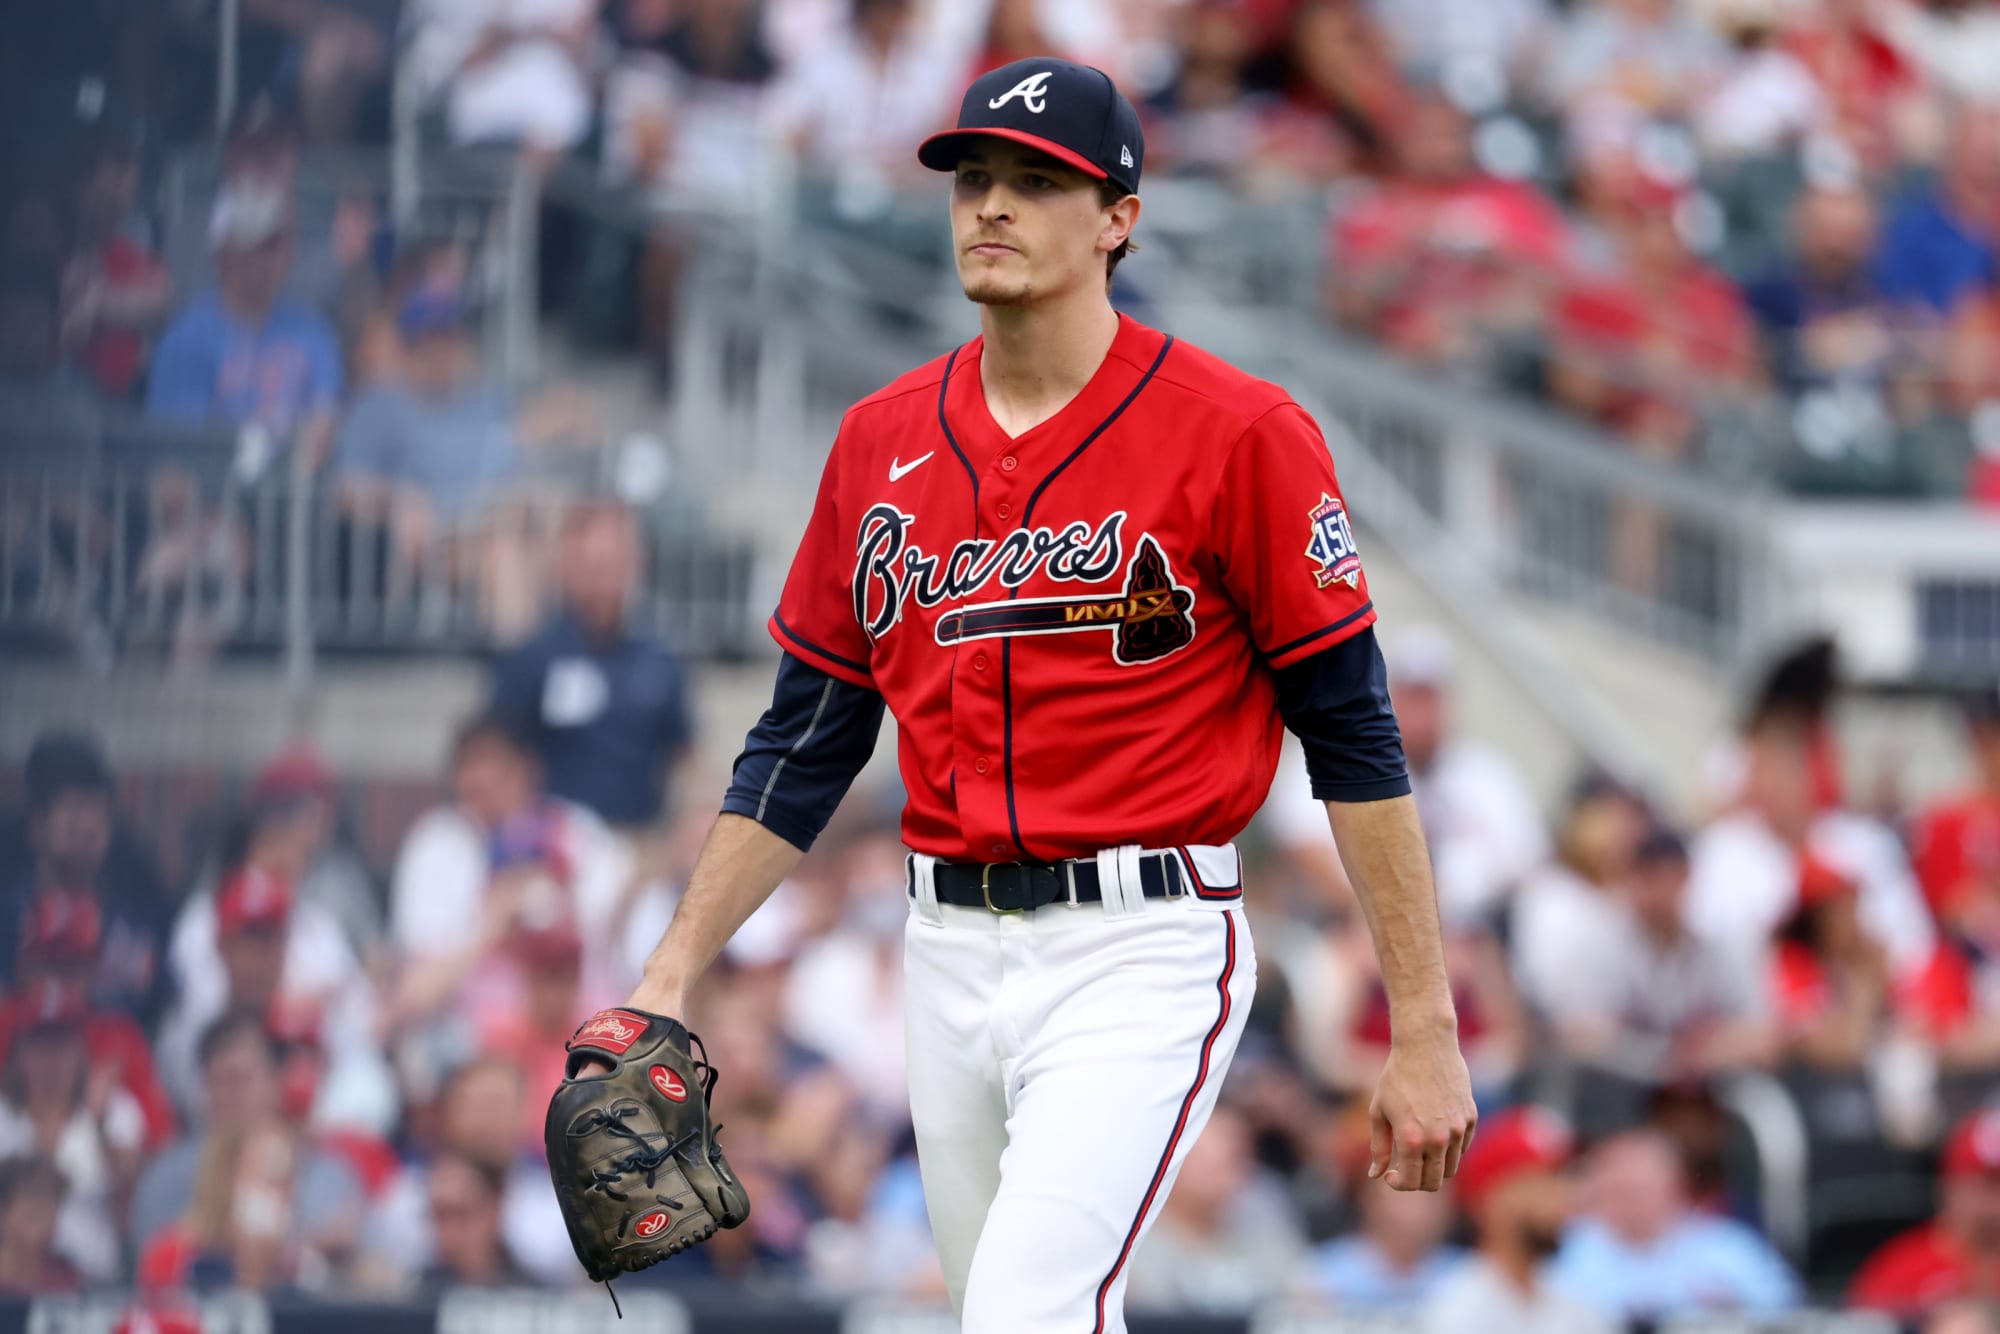 Braves Game Today Braves vs. Phillies Lineup, Odds, Prediction, TV